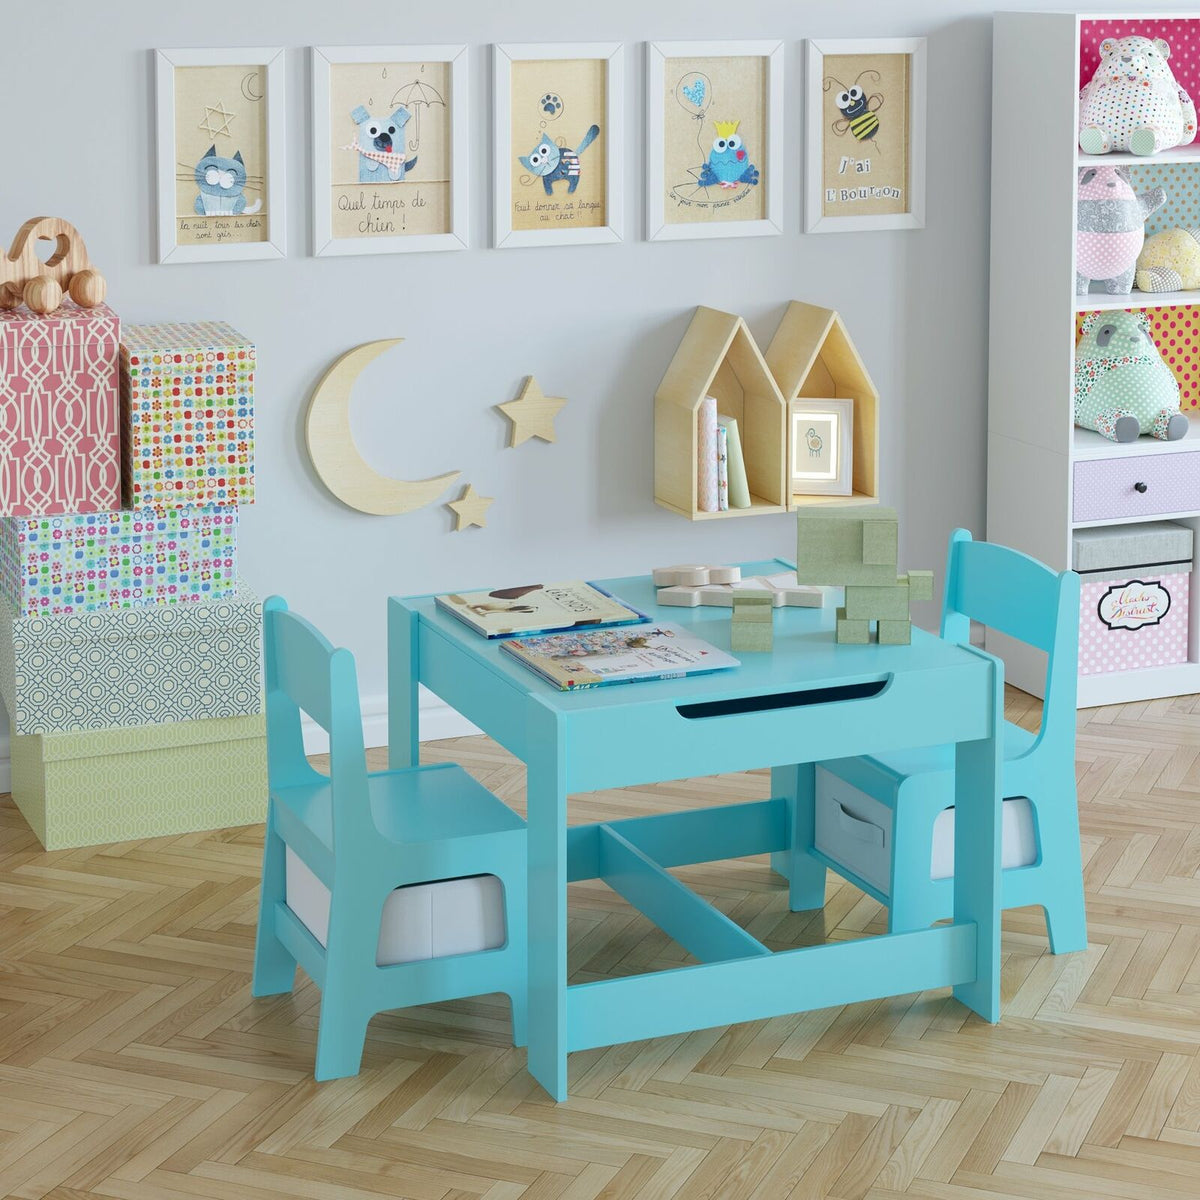 Kids Table and Chairs Set Toddler Child Wooden Toy Activity Desk Sets